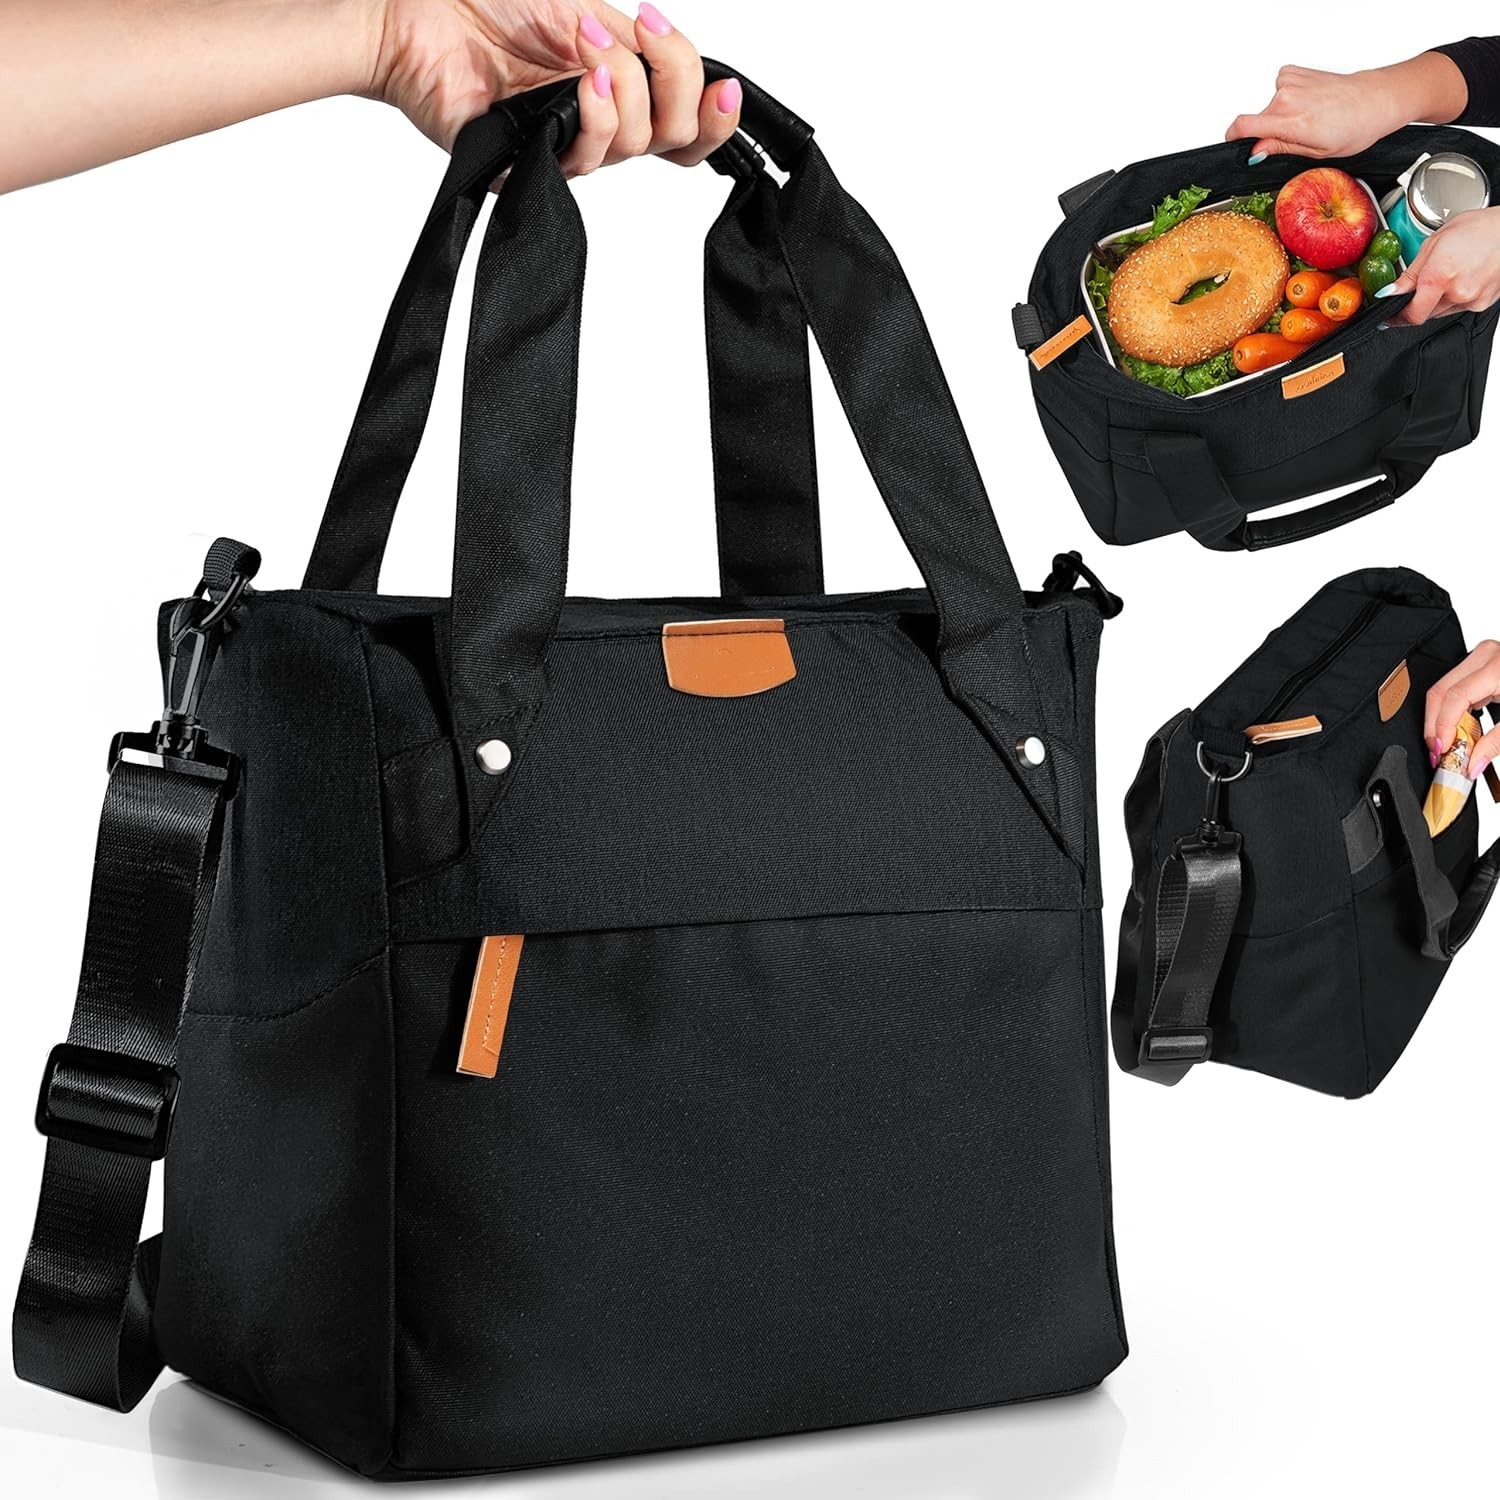 ODM OEM Hot Sales Fashion Insulated Lunch Bag Modern Lunch Cooler Bag Durable Fashion Bag